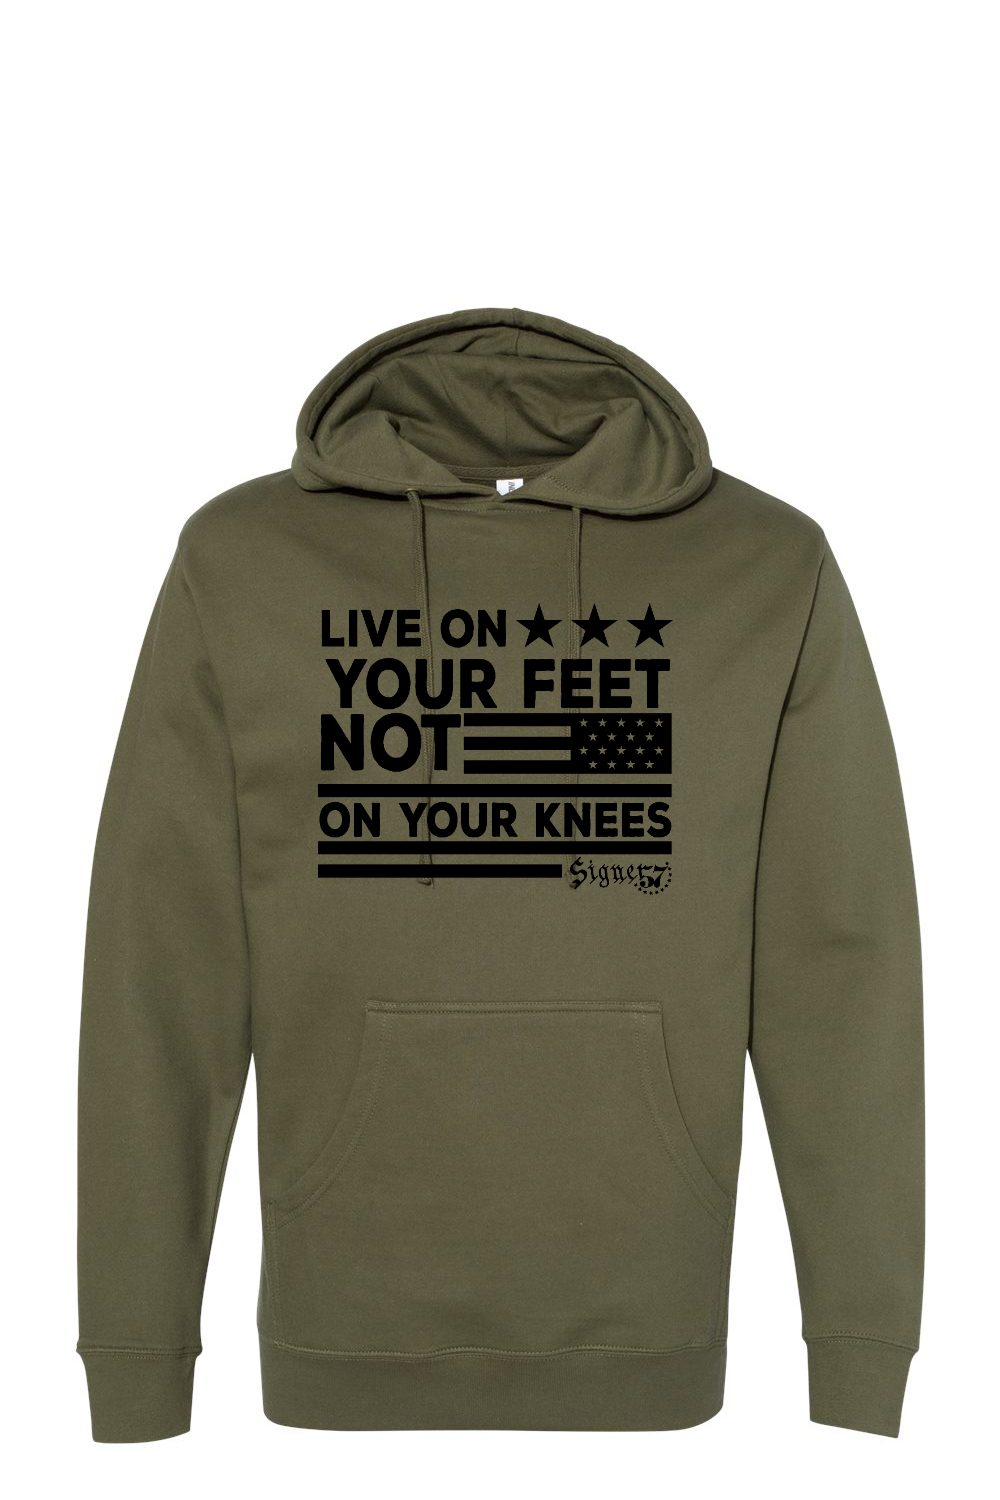 UNISEX Hoodie - Live On Your Feet Not On Your Knees